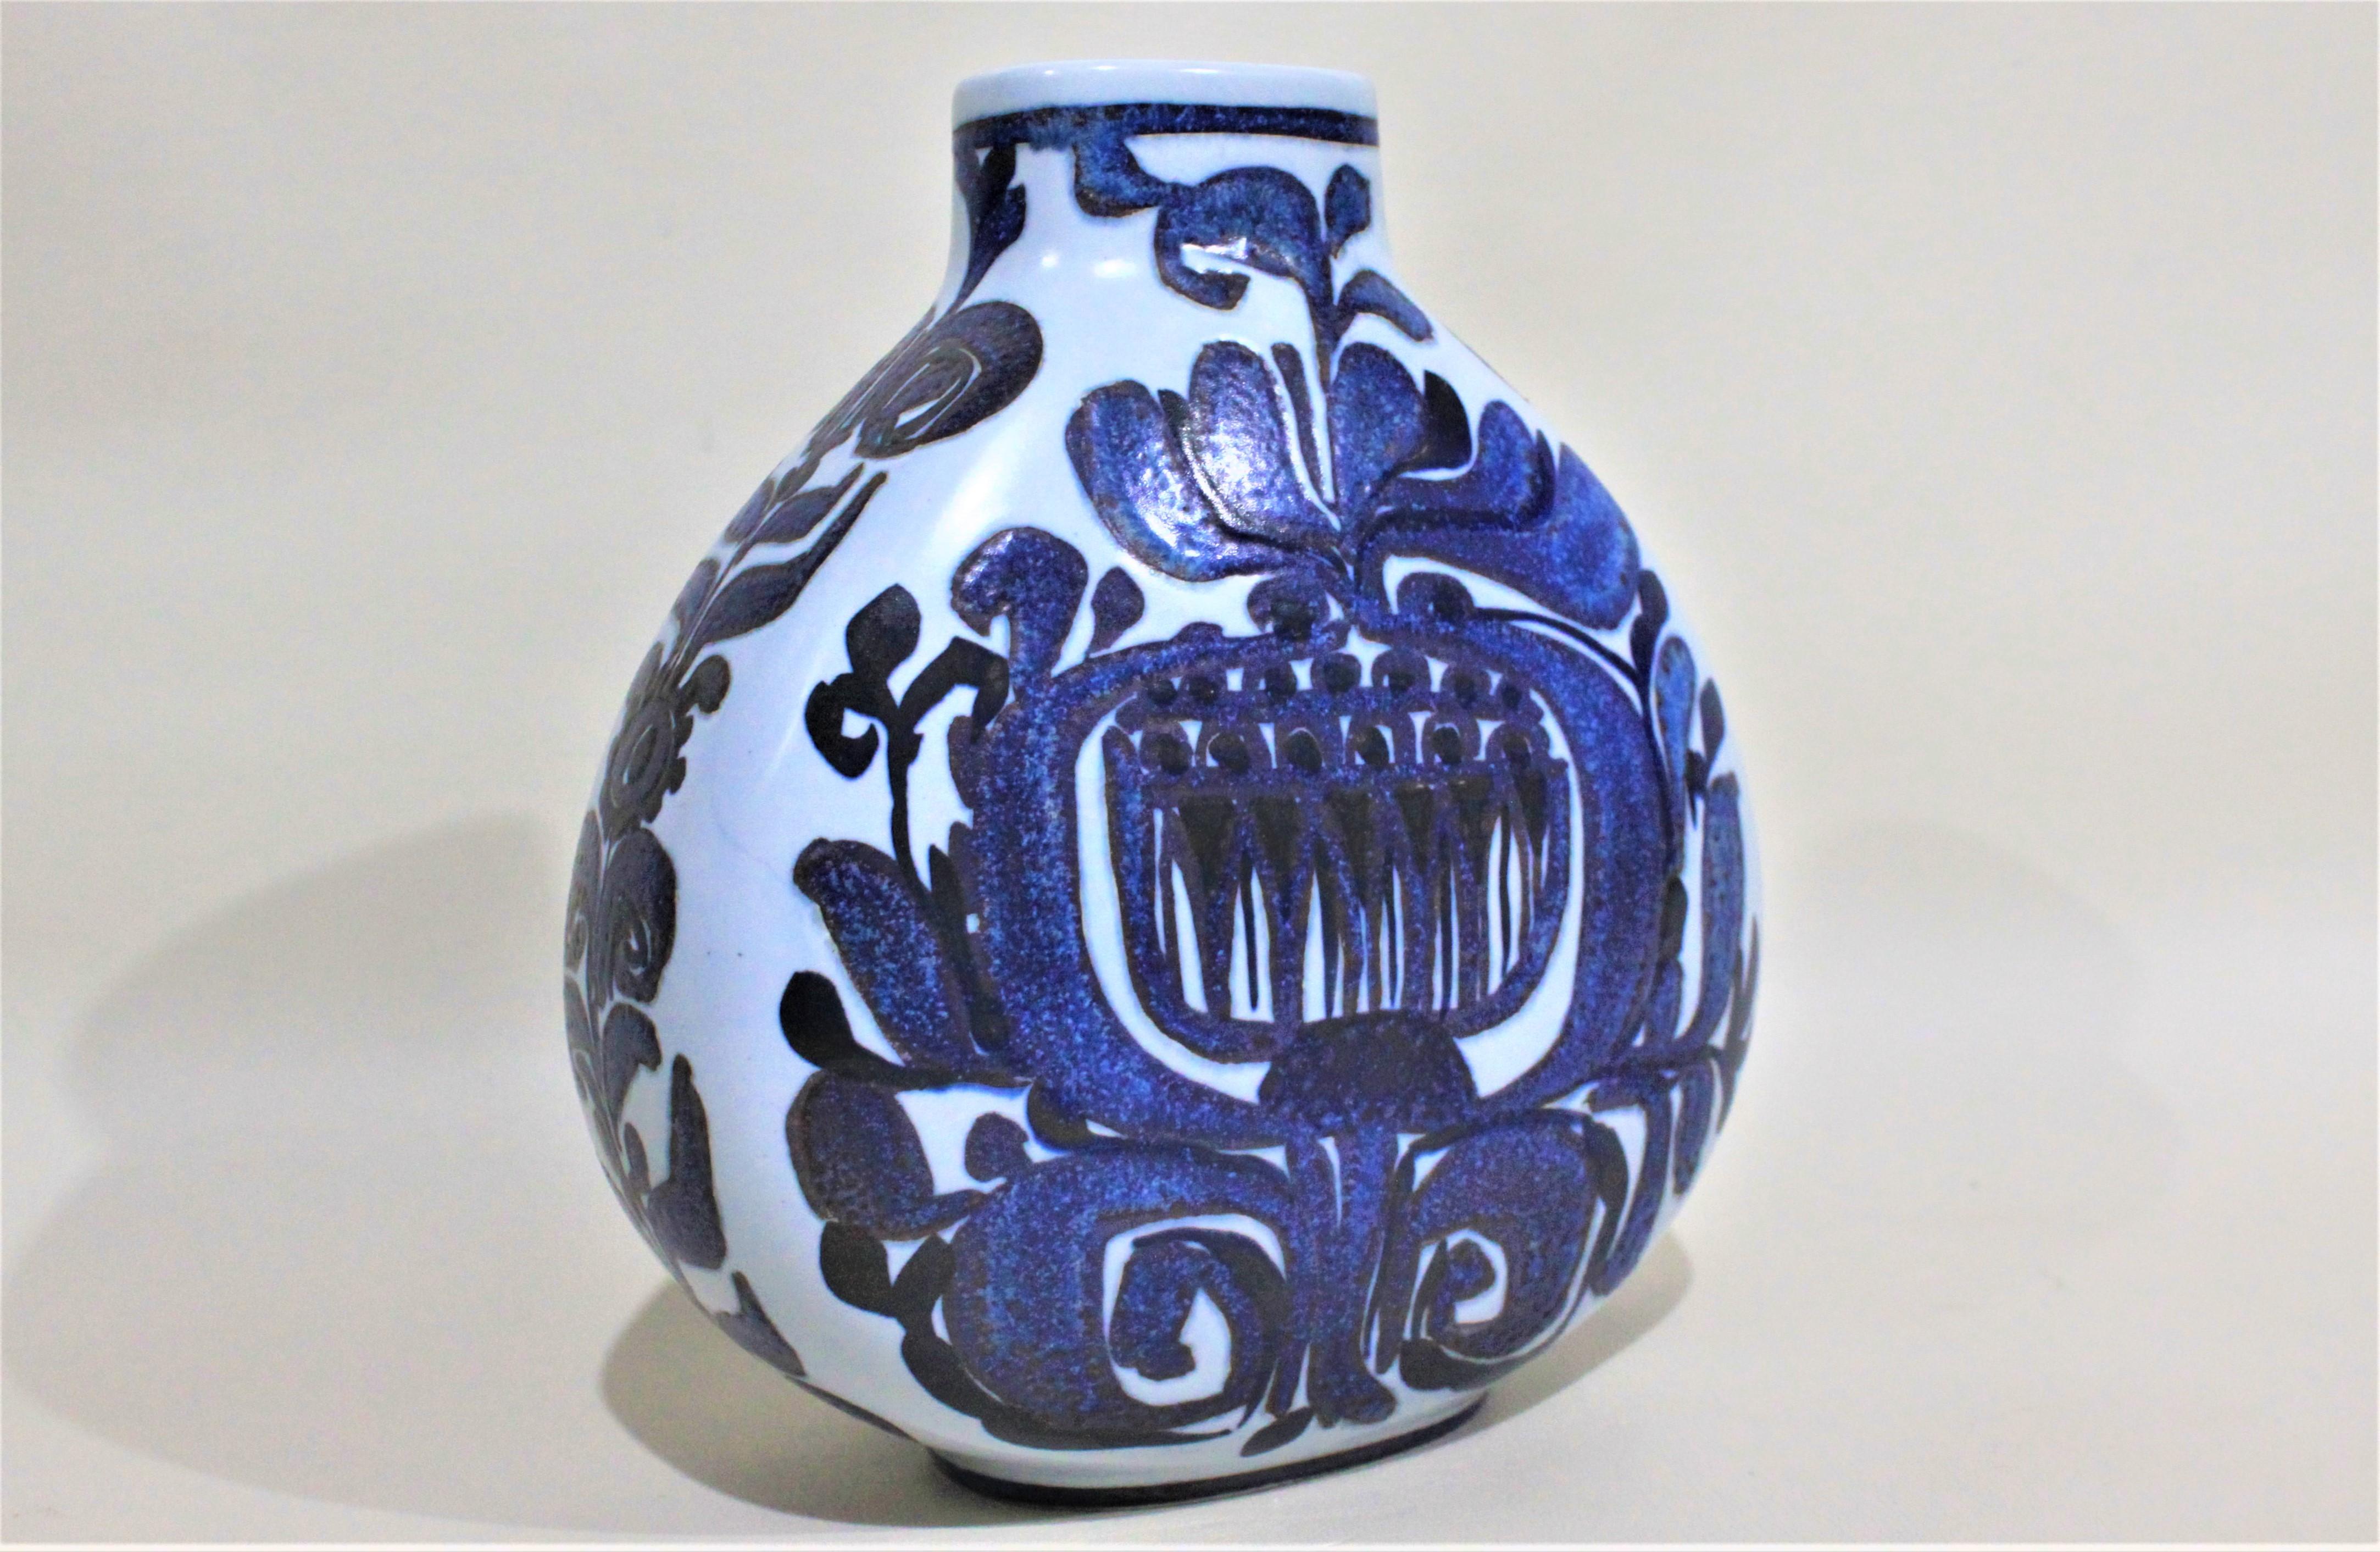 This Danish art pottery vase was made by Royal Copenhagen in the period and style of midcentury Modernism. The vase is done with a hand painted cobalt blue decoration over a light, or robin egg blue background. The vase is clearly signed with the